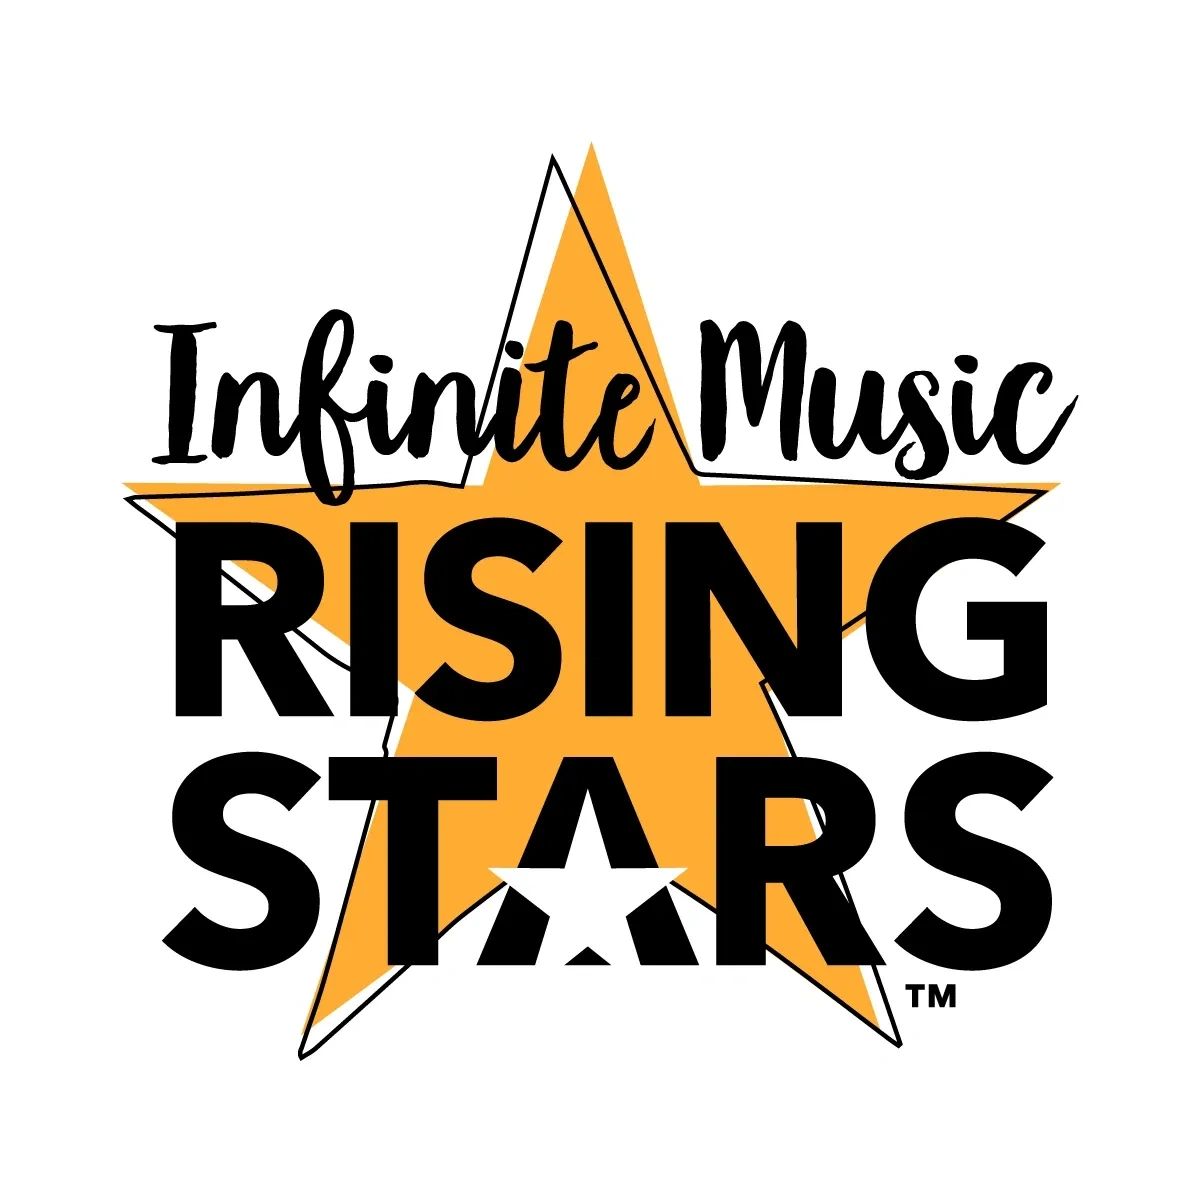 Announcing the top IT Rising Stars 2023